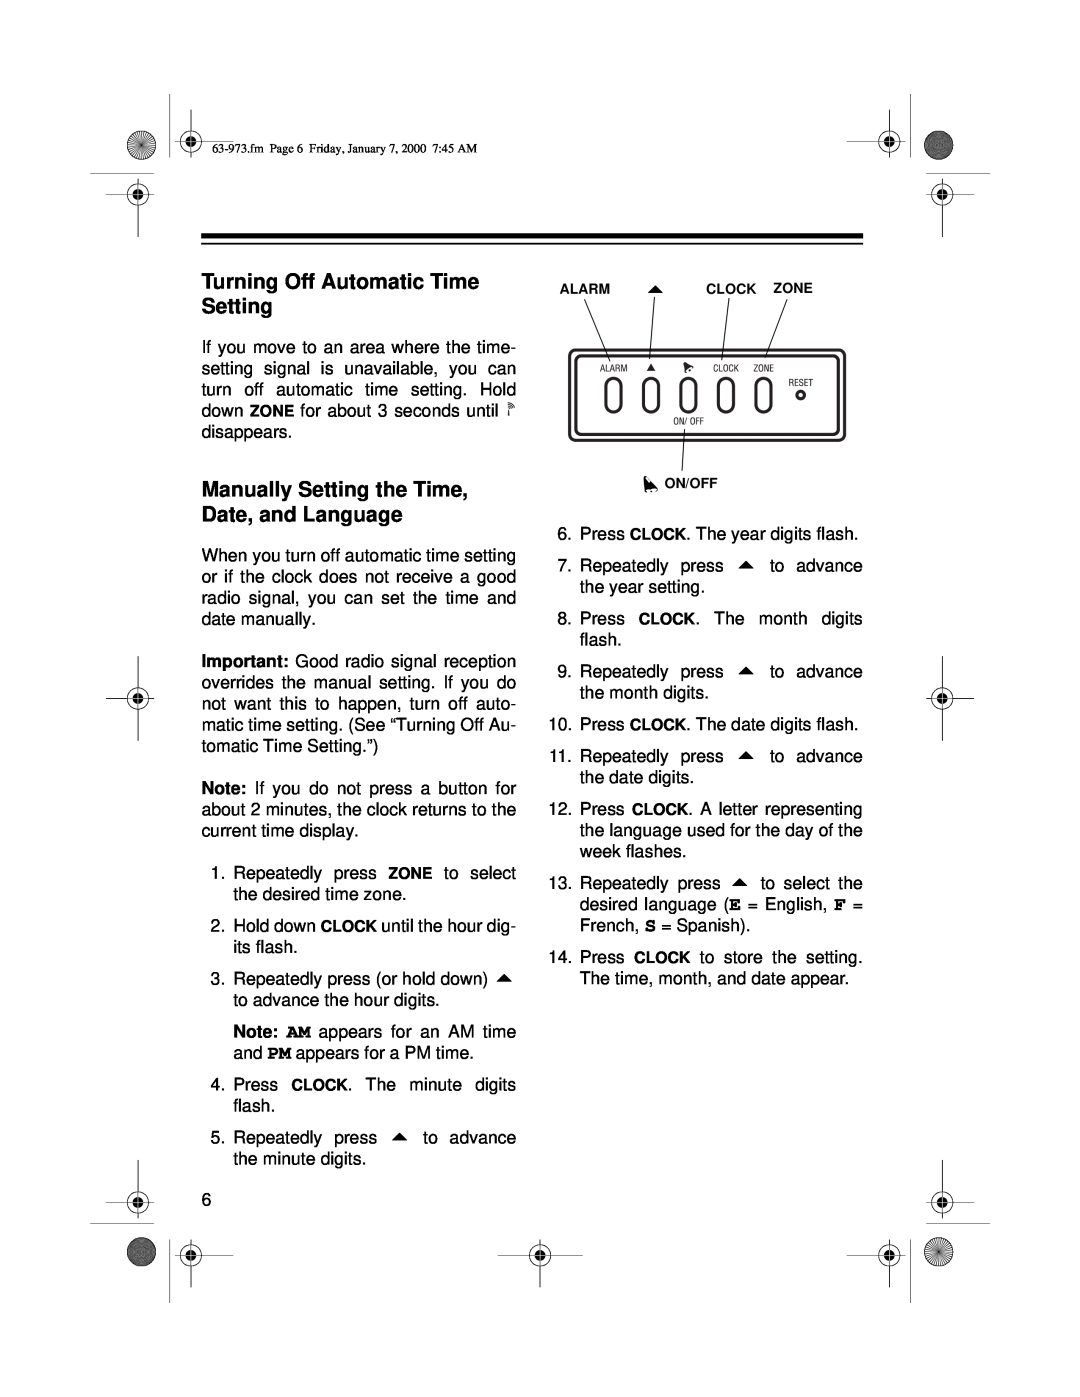 Radio Shack 63-973 owner manual Turning Off Automatic Time Setting, Manually Setting the Time, Date, and Language 